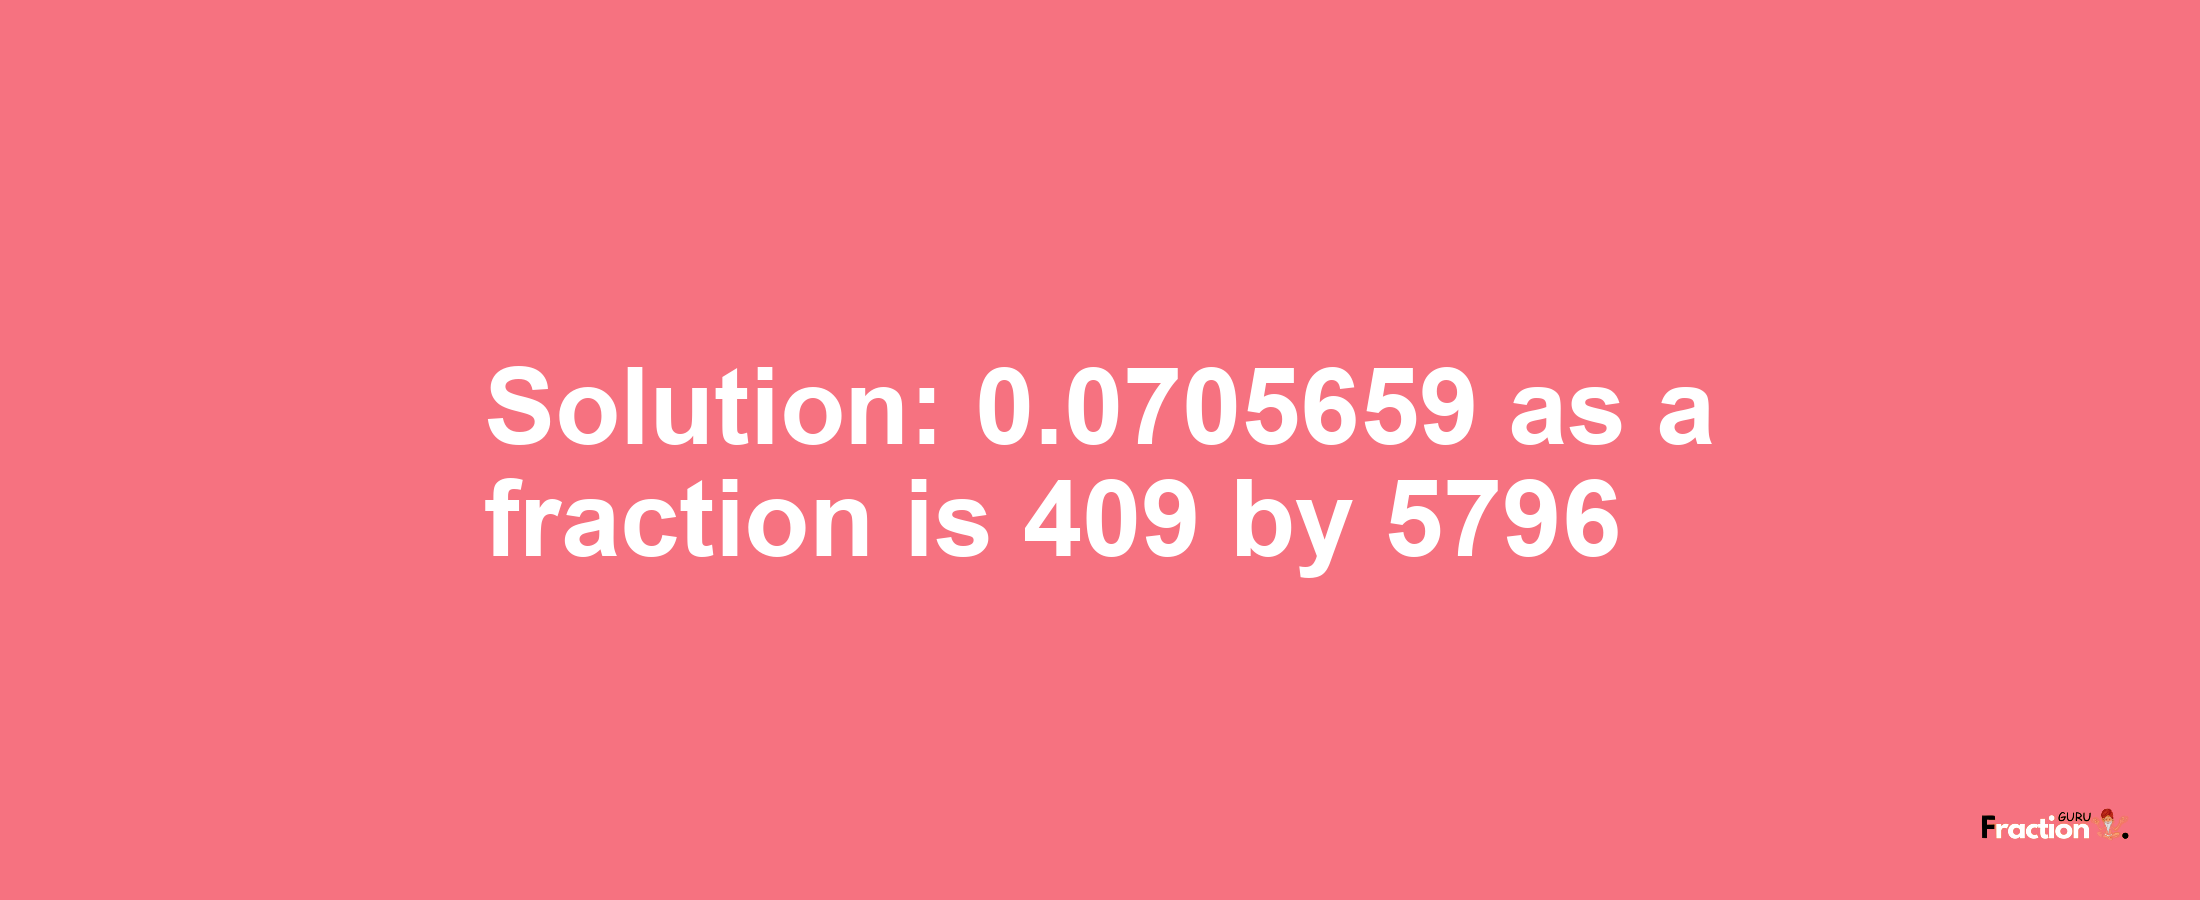 Solution:0.0705659 as a fraction is 409/5796